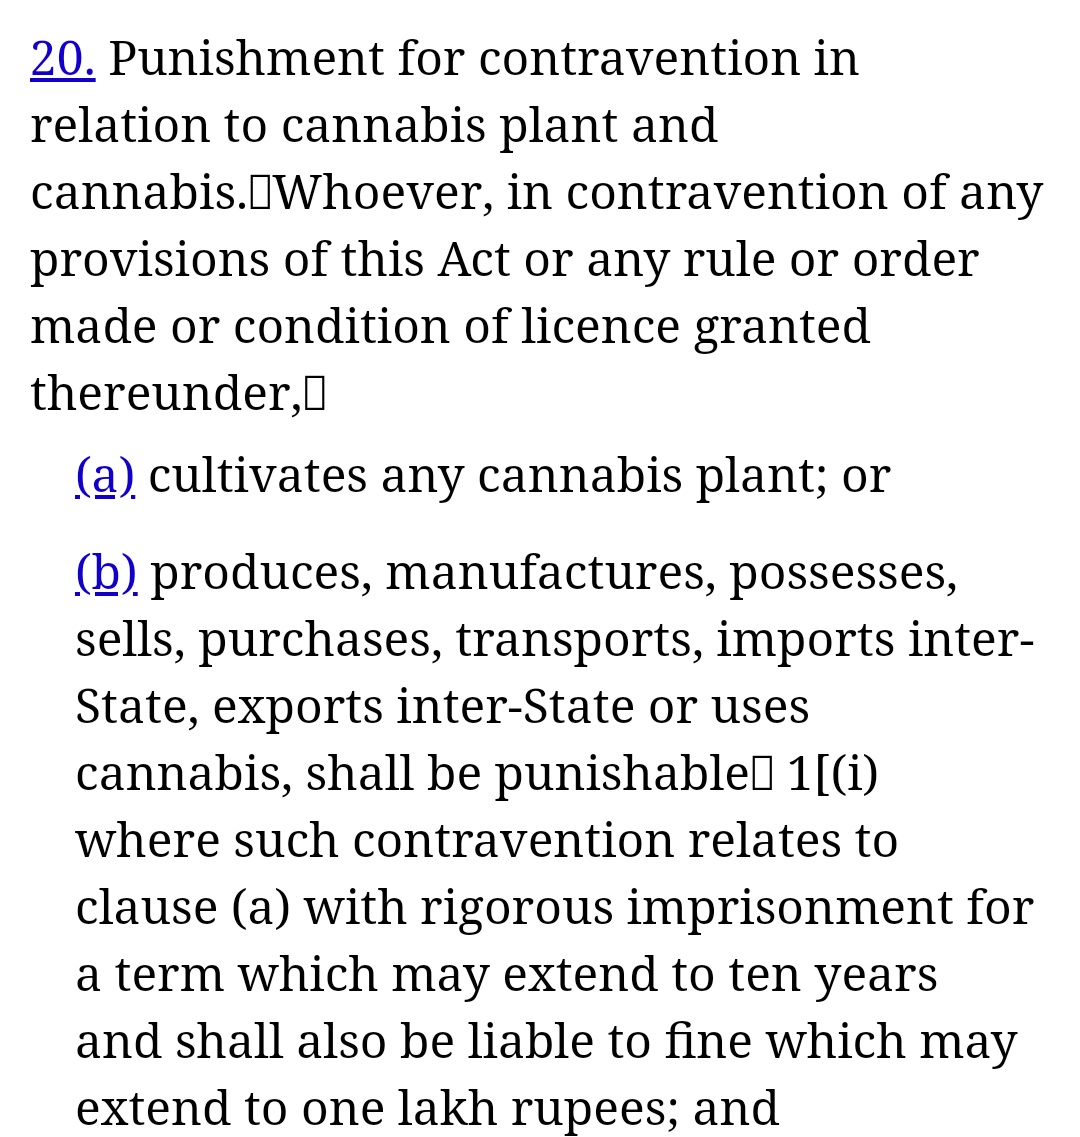 There are parts of the NDPS Act which transcends common sense. According to Section 2 The leaf and seeds of the marijuana plant is not banned but Section 20 says that the cultivation of the entire plant is a crime.Bhang holds religious significance and is legal in many states